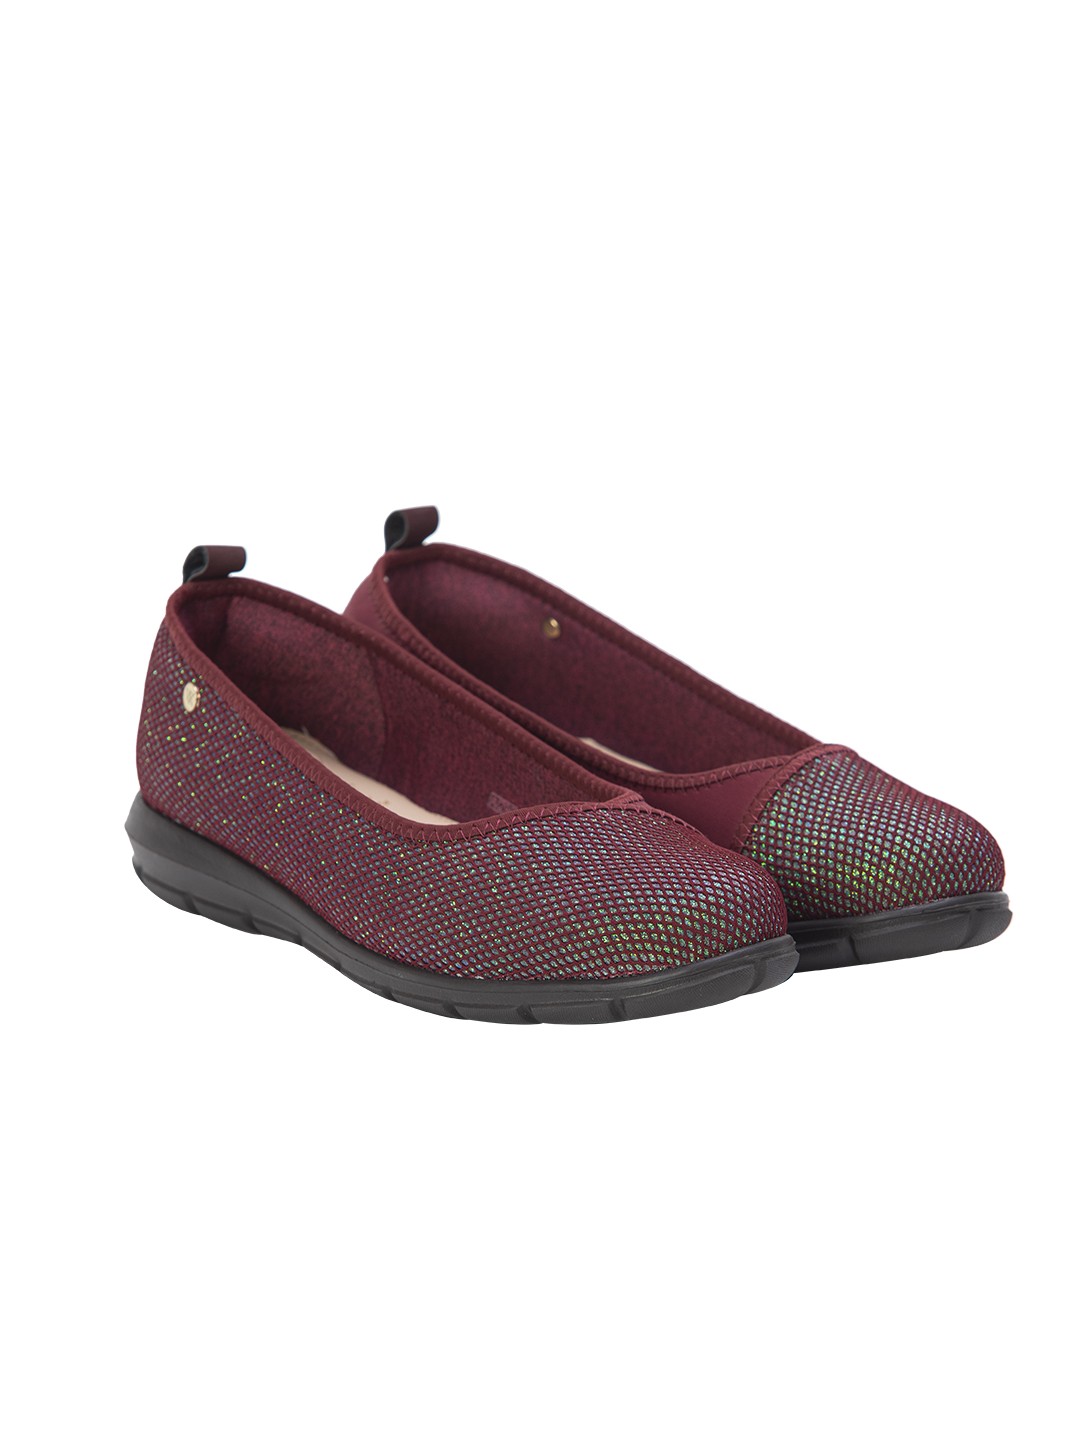 Buy Von Wellx Germany Comfort Pace Mehroon Casual Shoes Online in Dubai